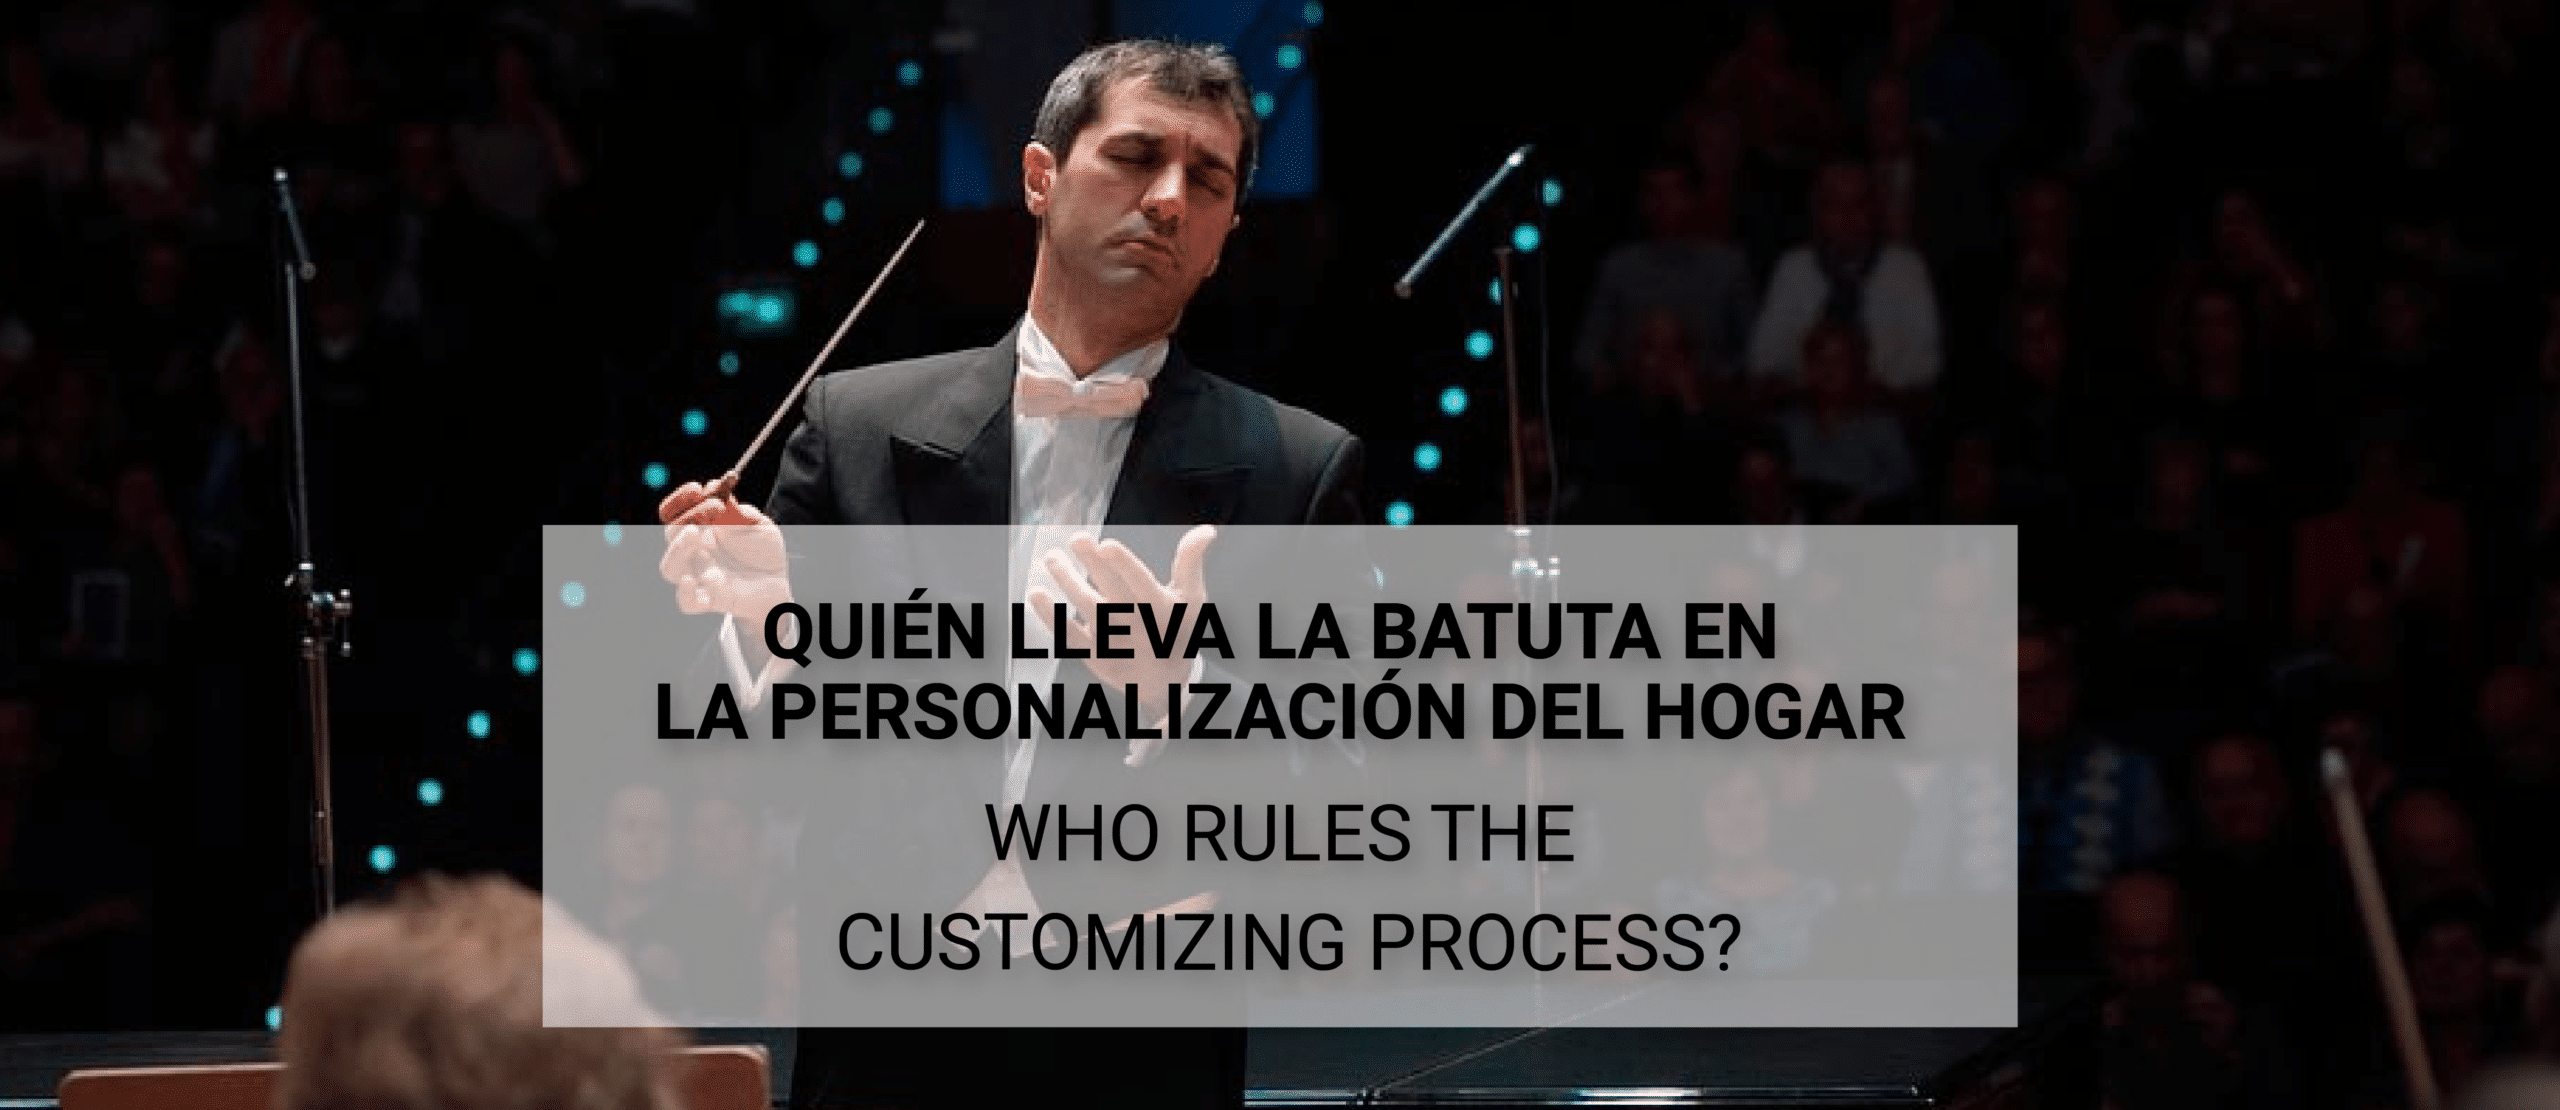 Who rules the customizing process?